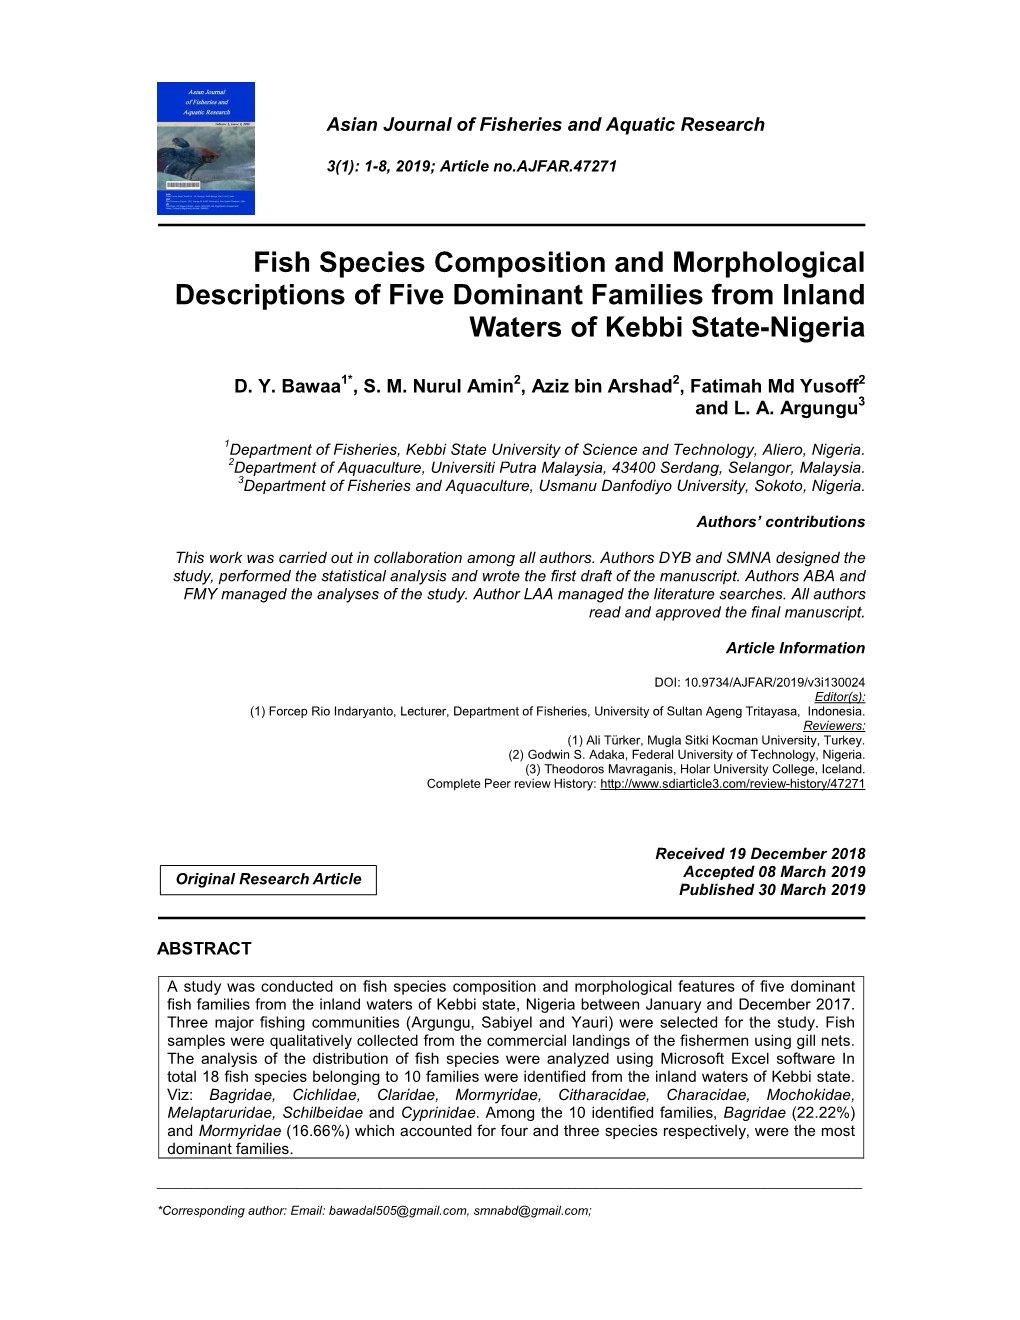 Fish Species Composition and Morphological Descriptions of Five Dominant Families from Inland Waters of Kebbi State-Nigeria